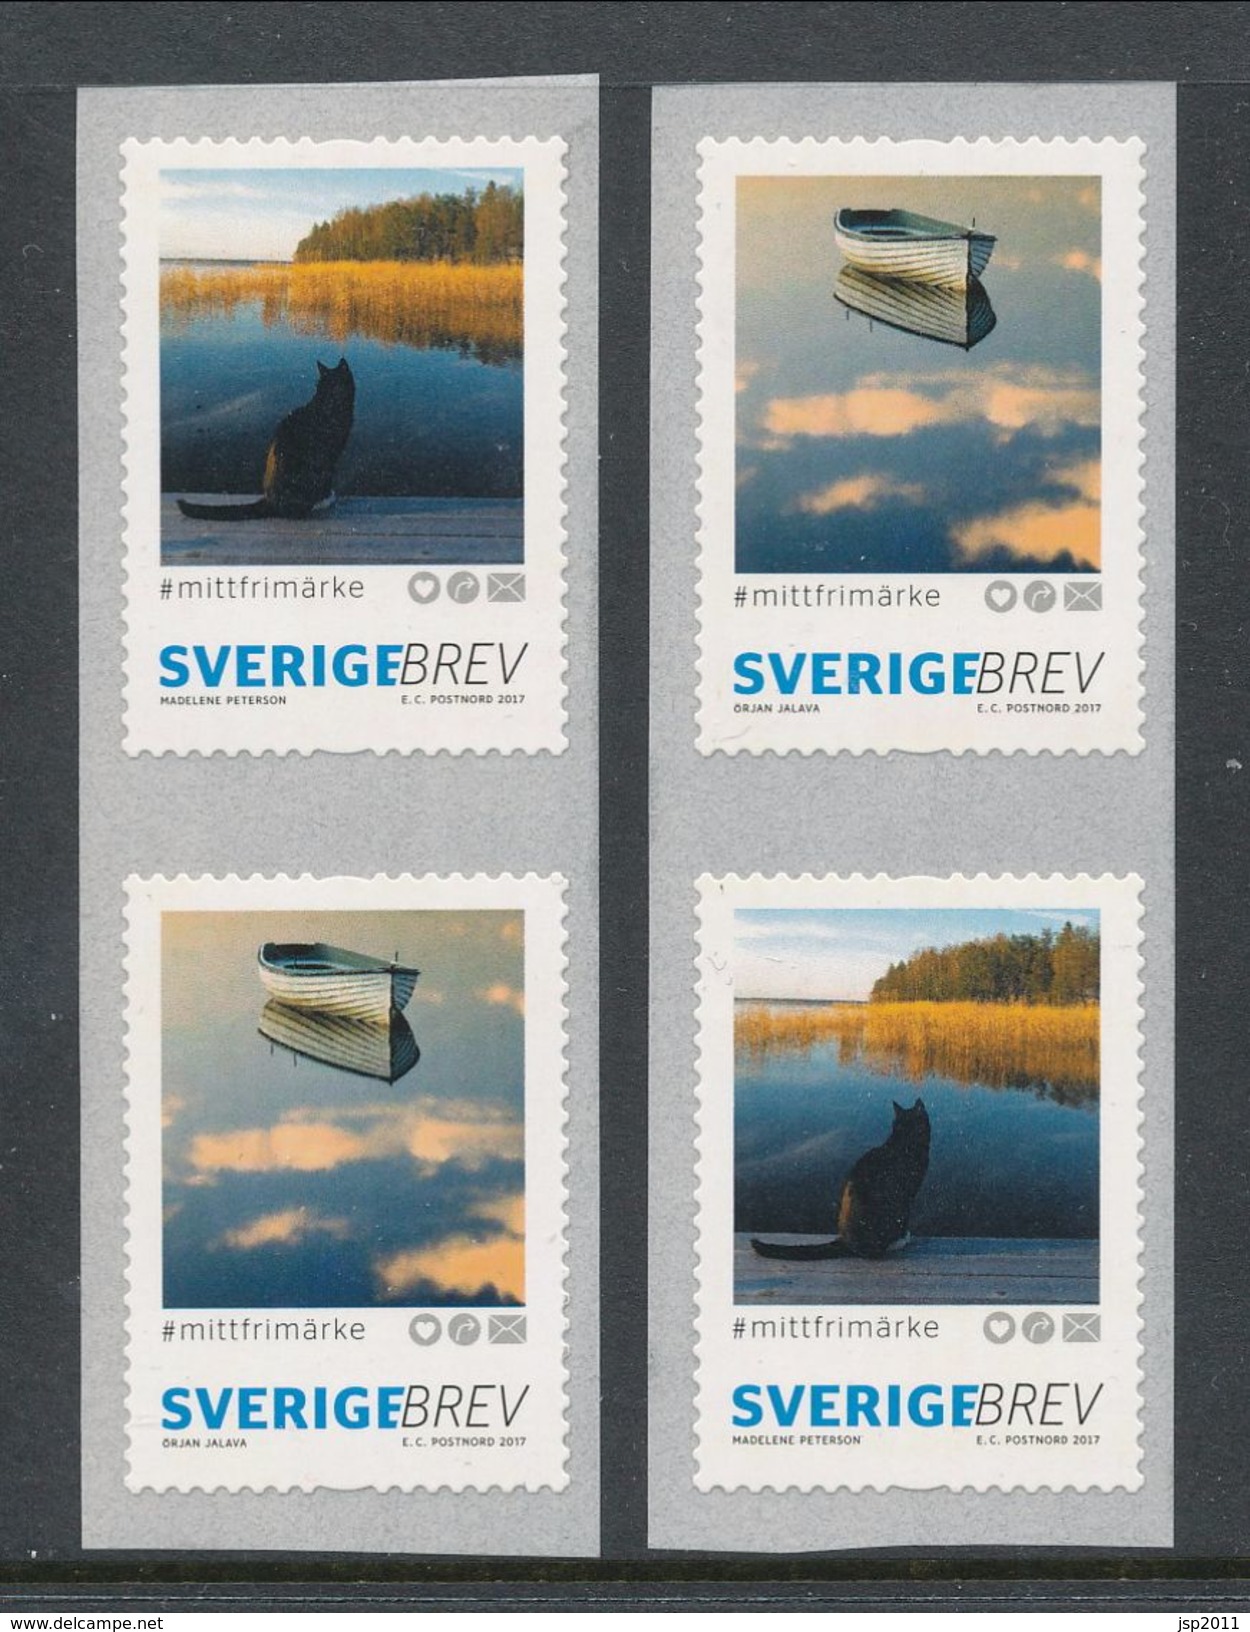 Sweden 2017. Facit # 3176-3177. My Stamp - National Mail Coil. Coil Pairs SX1 And SX2. MNH (**) - Ungebraucht